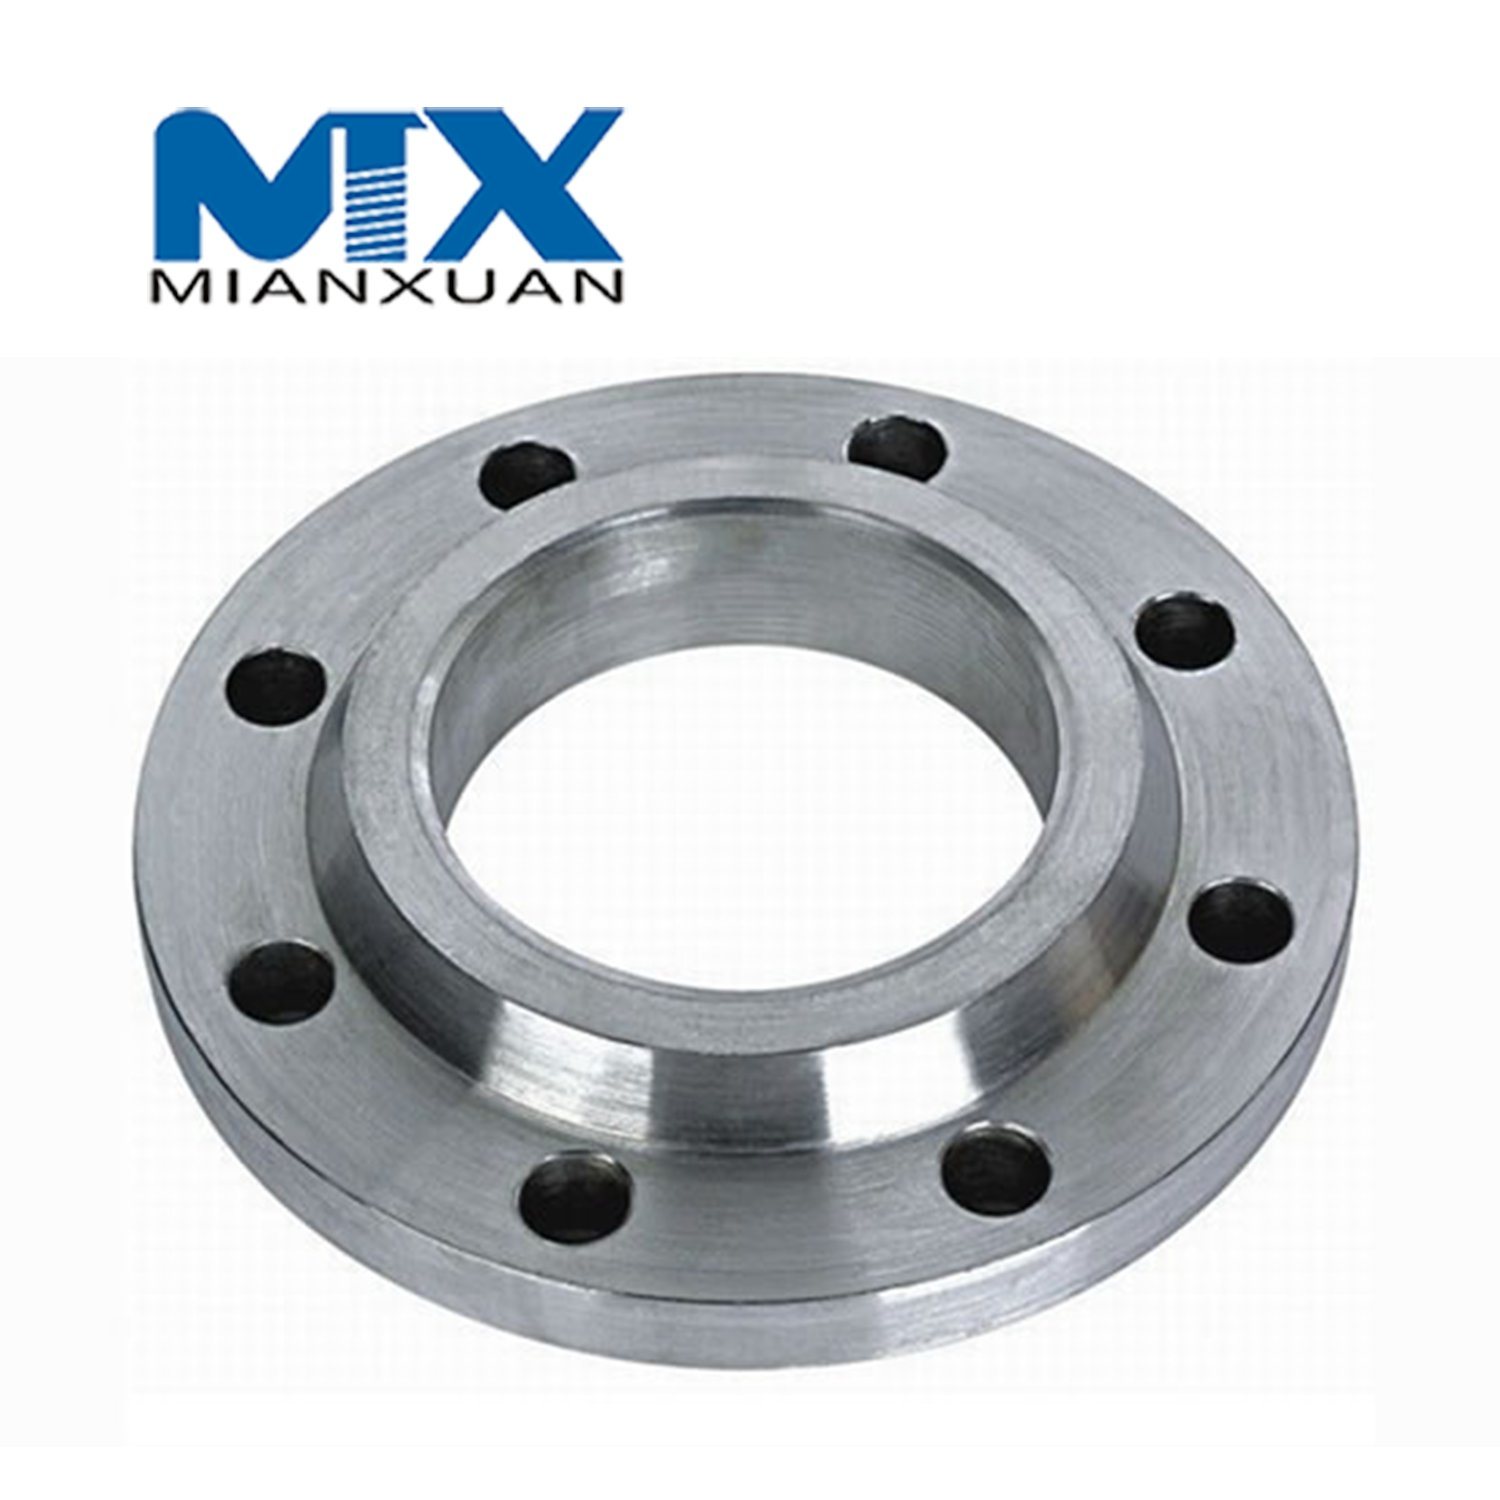 Stainless Steel Machined Flange for Agricultural Machinery